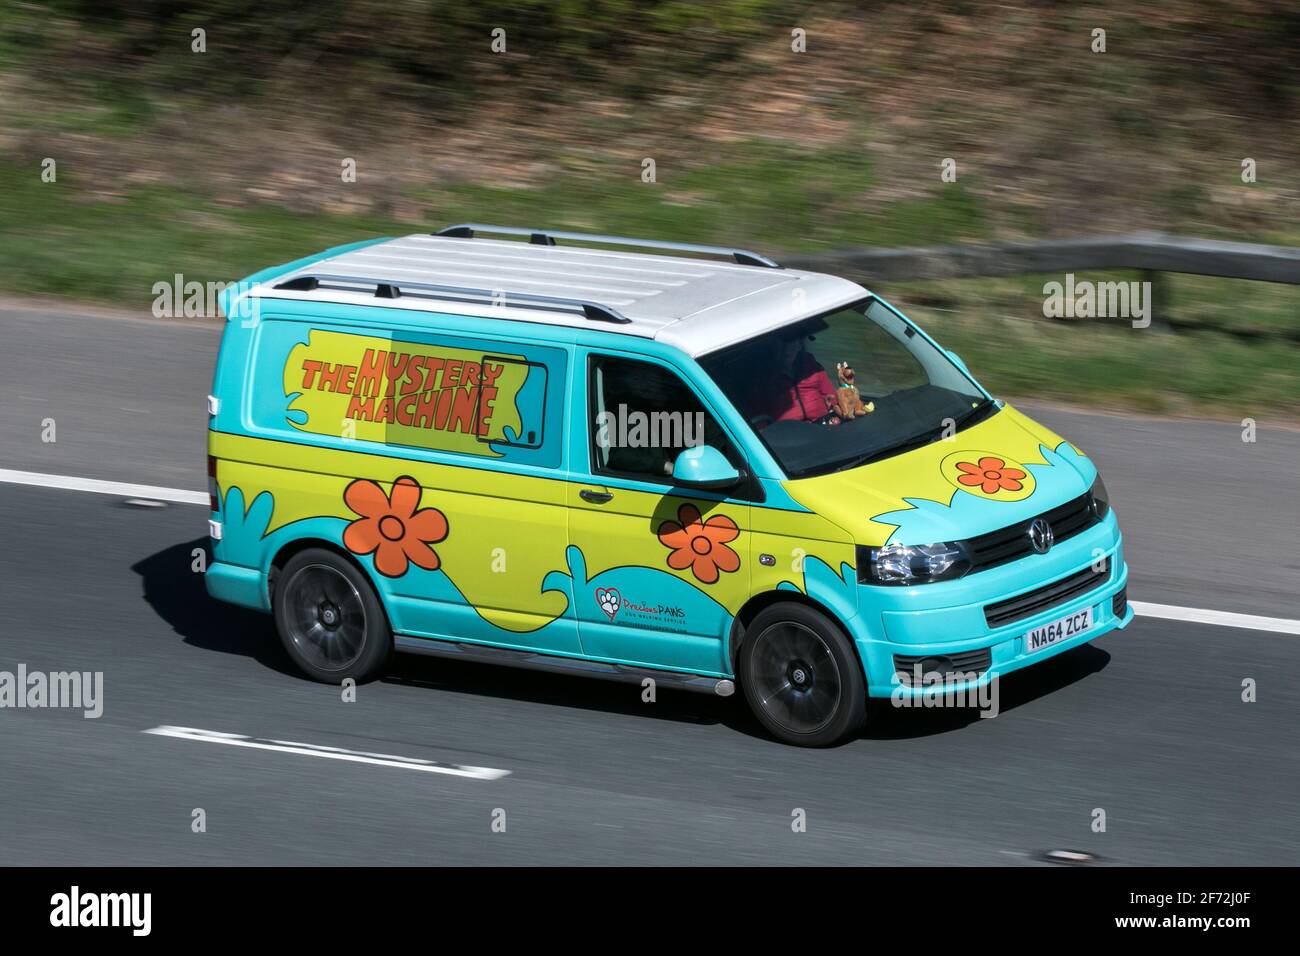 2014 VW Transporter T28 Startline Tdi caravelle. The Mystery Machine Scooby Doo dog walking service Volkswagen driving on the M6 motorway UK Stock Photo